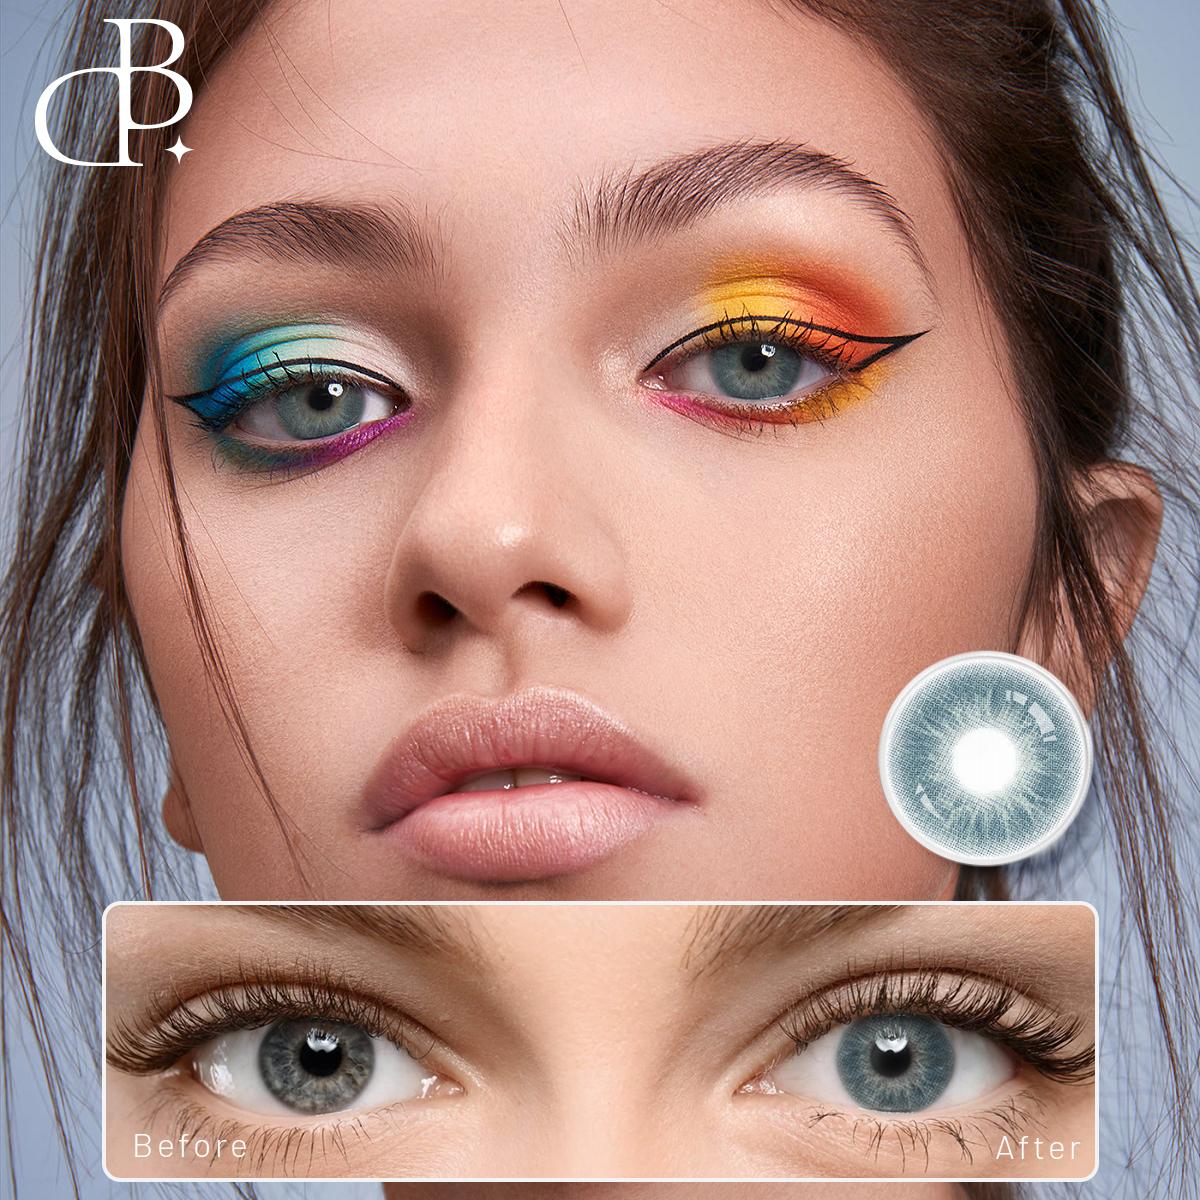 DBeyes Comfortable Color Contacts Eye Contact Lenses wholesale Yearly Natural Colored Contact Lense